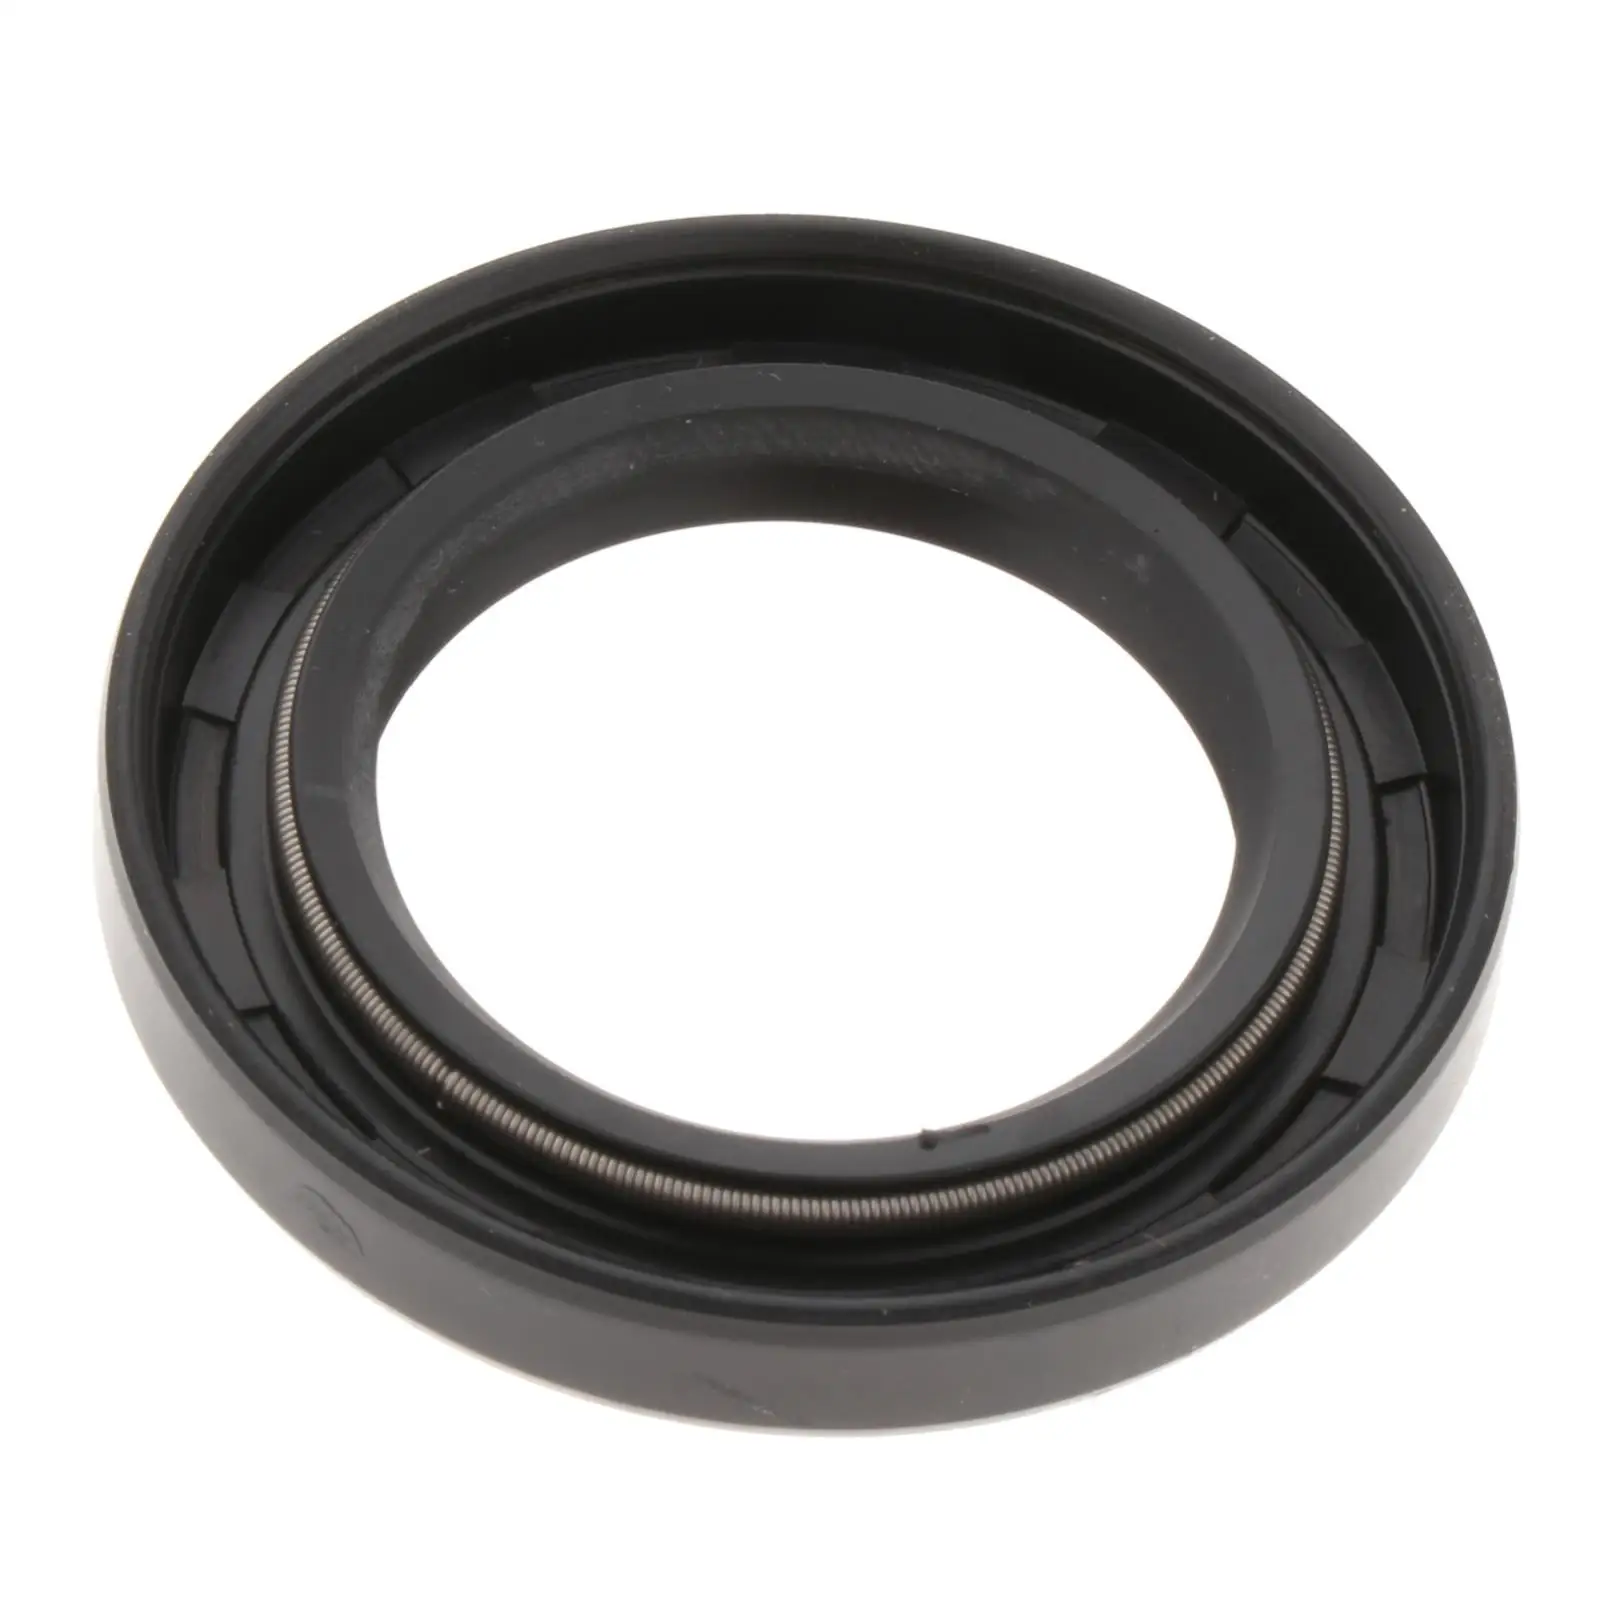 Oil Seal, 93102-30M23, Fit for Yamaha Outboard Motor 2T 60HP-90HP Accessory Easy to Install Direct Replaces Spare Parts